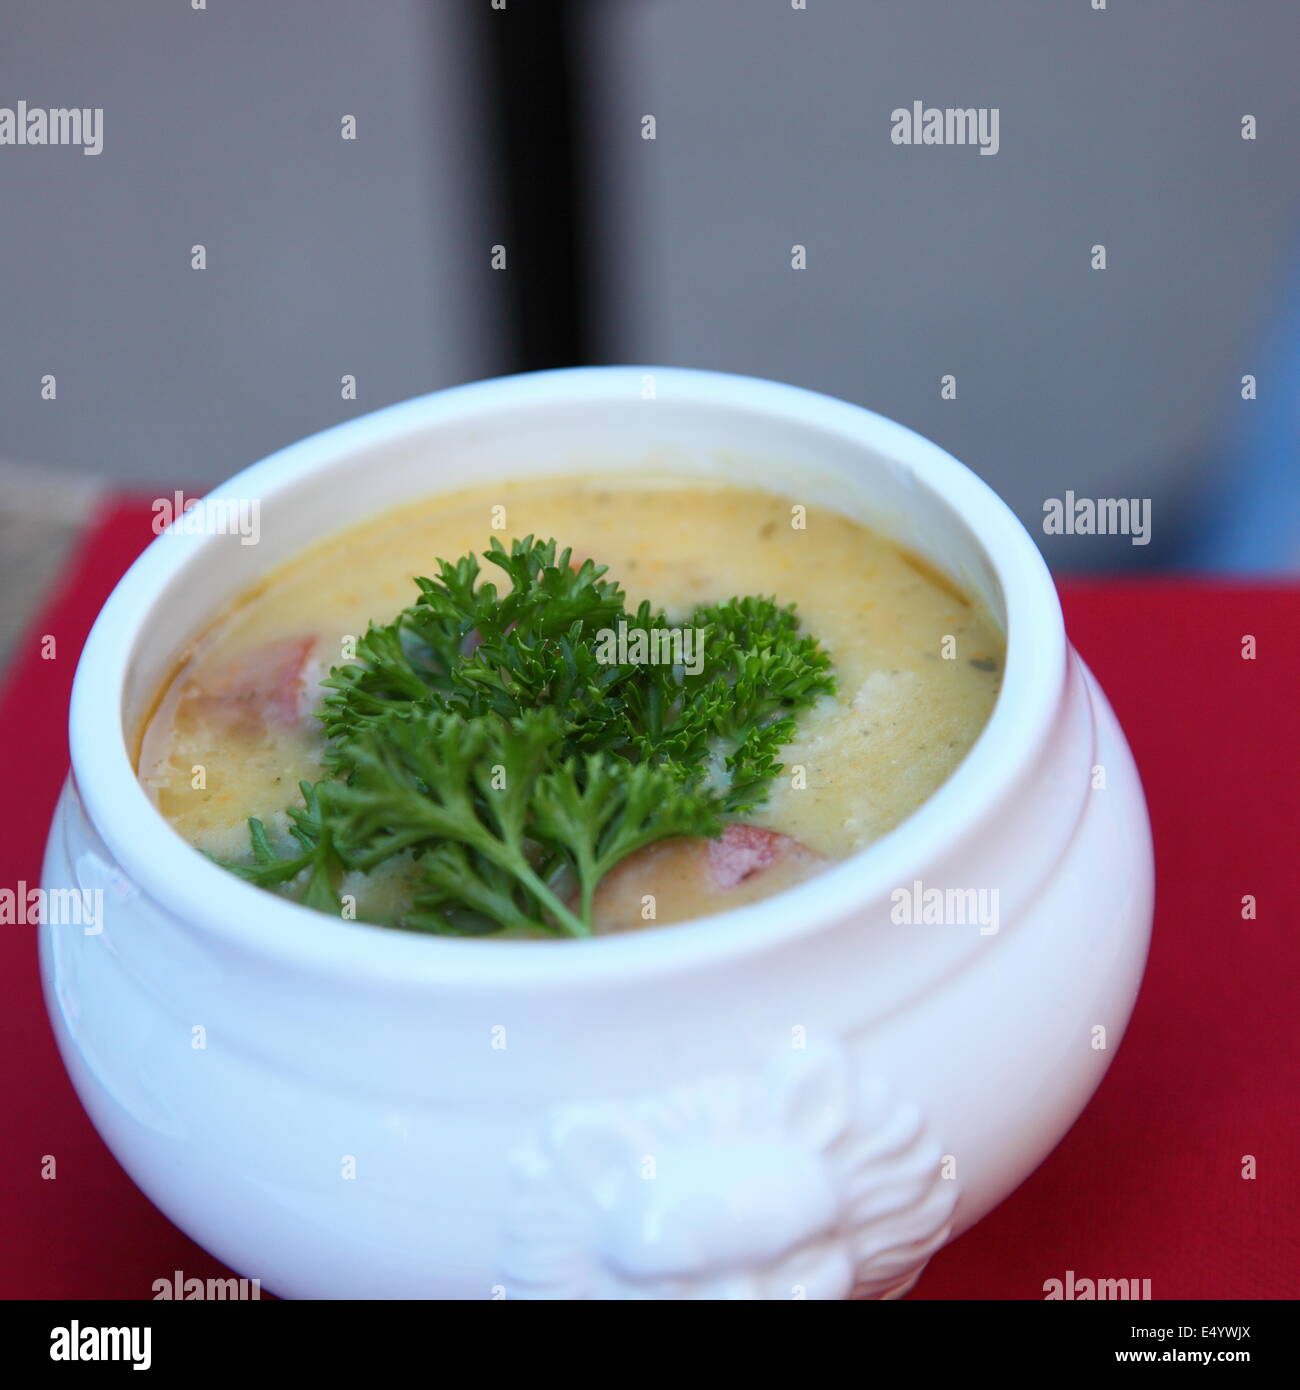 Bowl of hot soup garnished with parsley Stock Photo